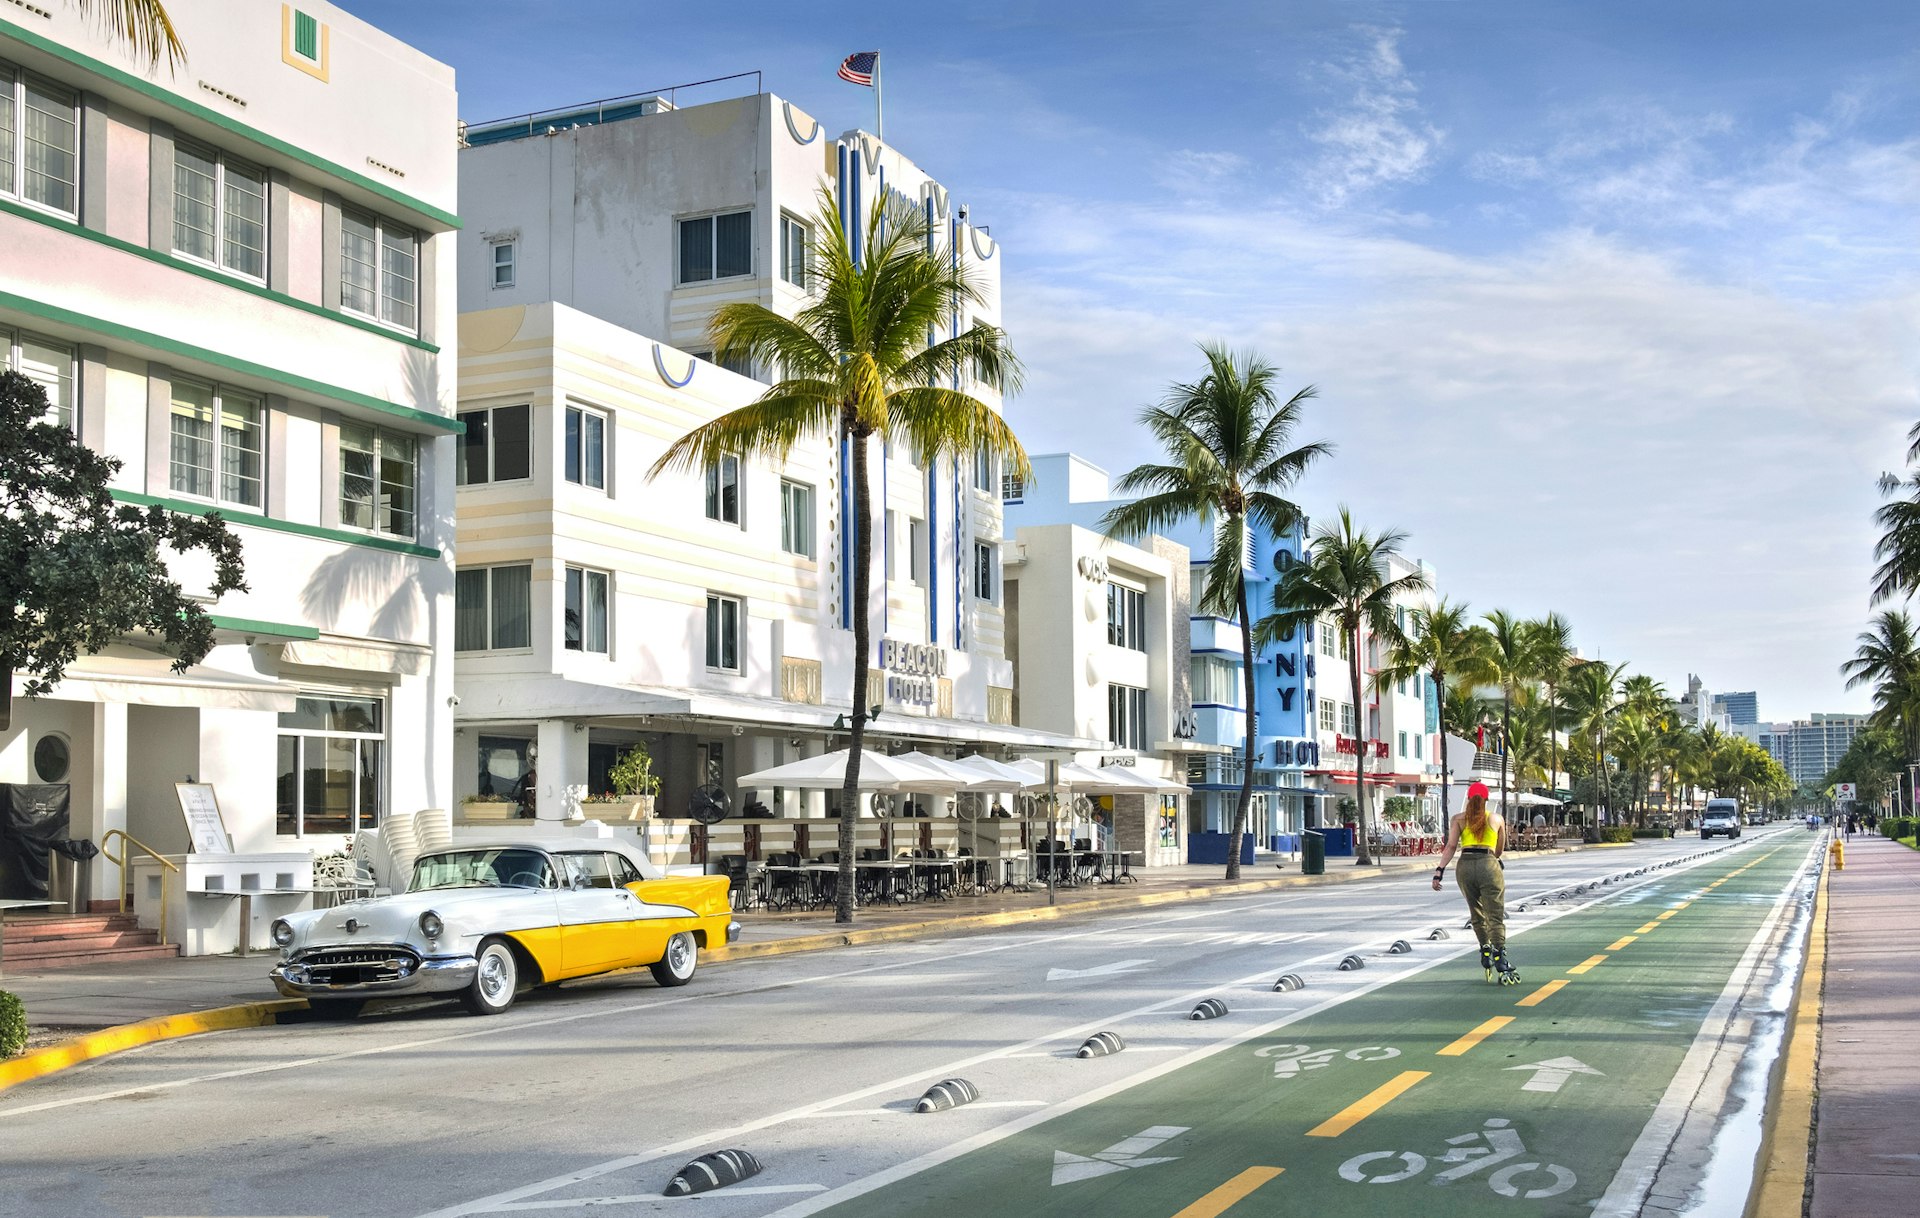 Art deco styled hotels and businesses along Ocean Drive in South Beach, a famous art deco neighborhood in Miami Beach, Florida.